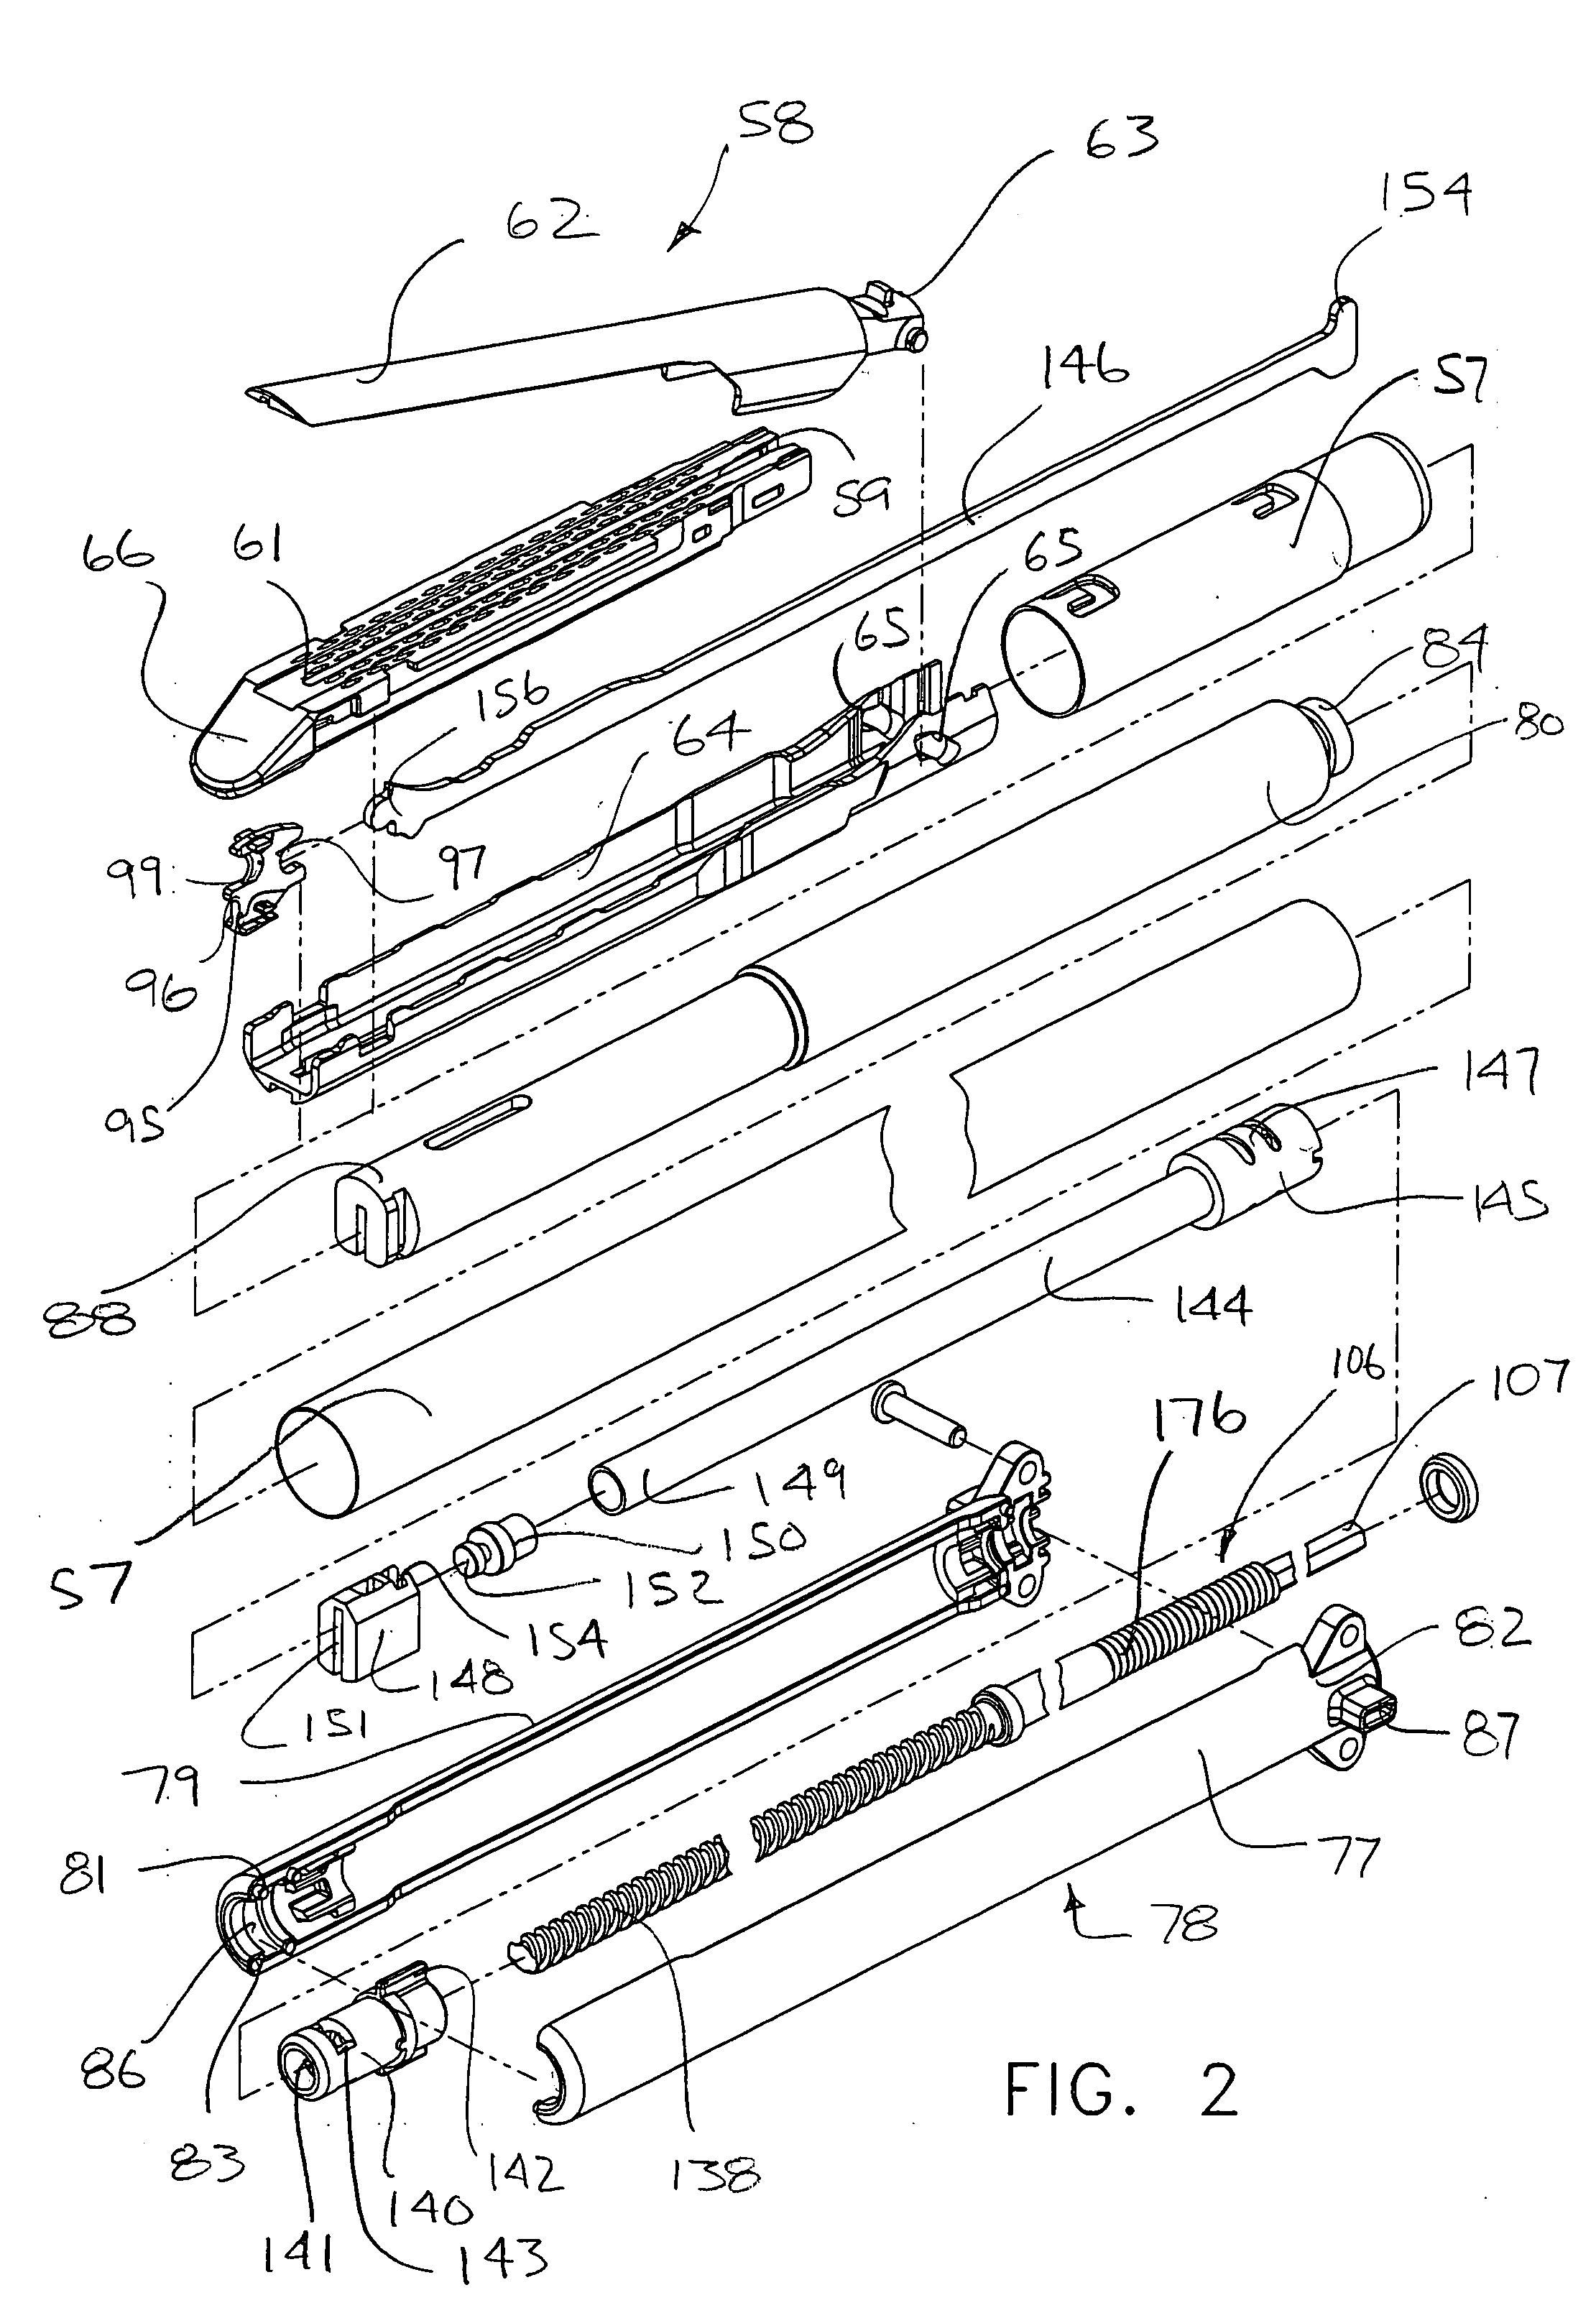 Surgical instrument having a common trigger for actuating an end effector closing system and a staple firing system